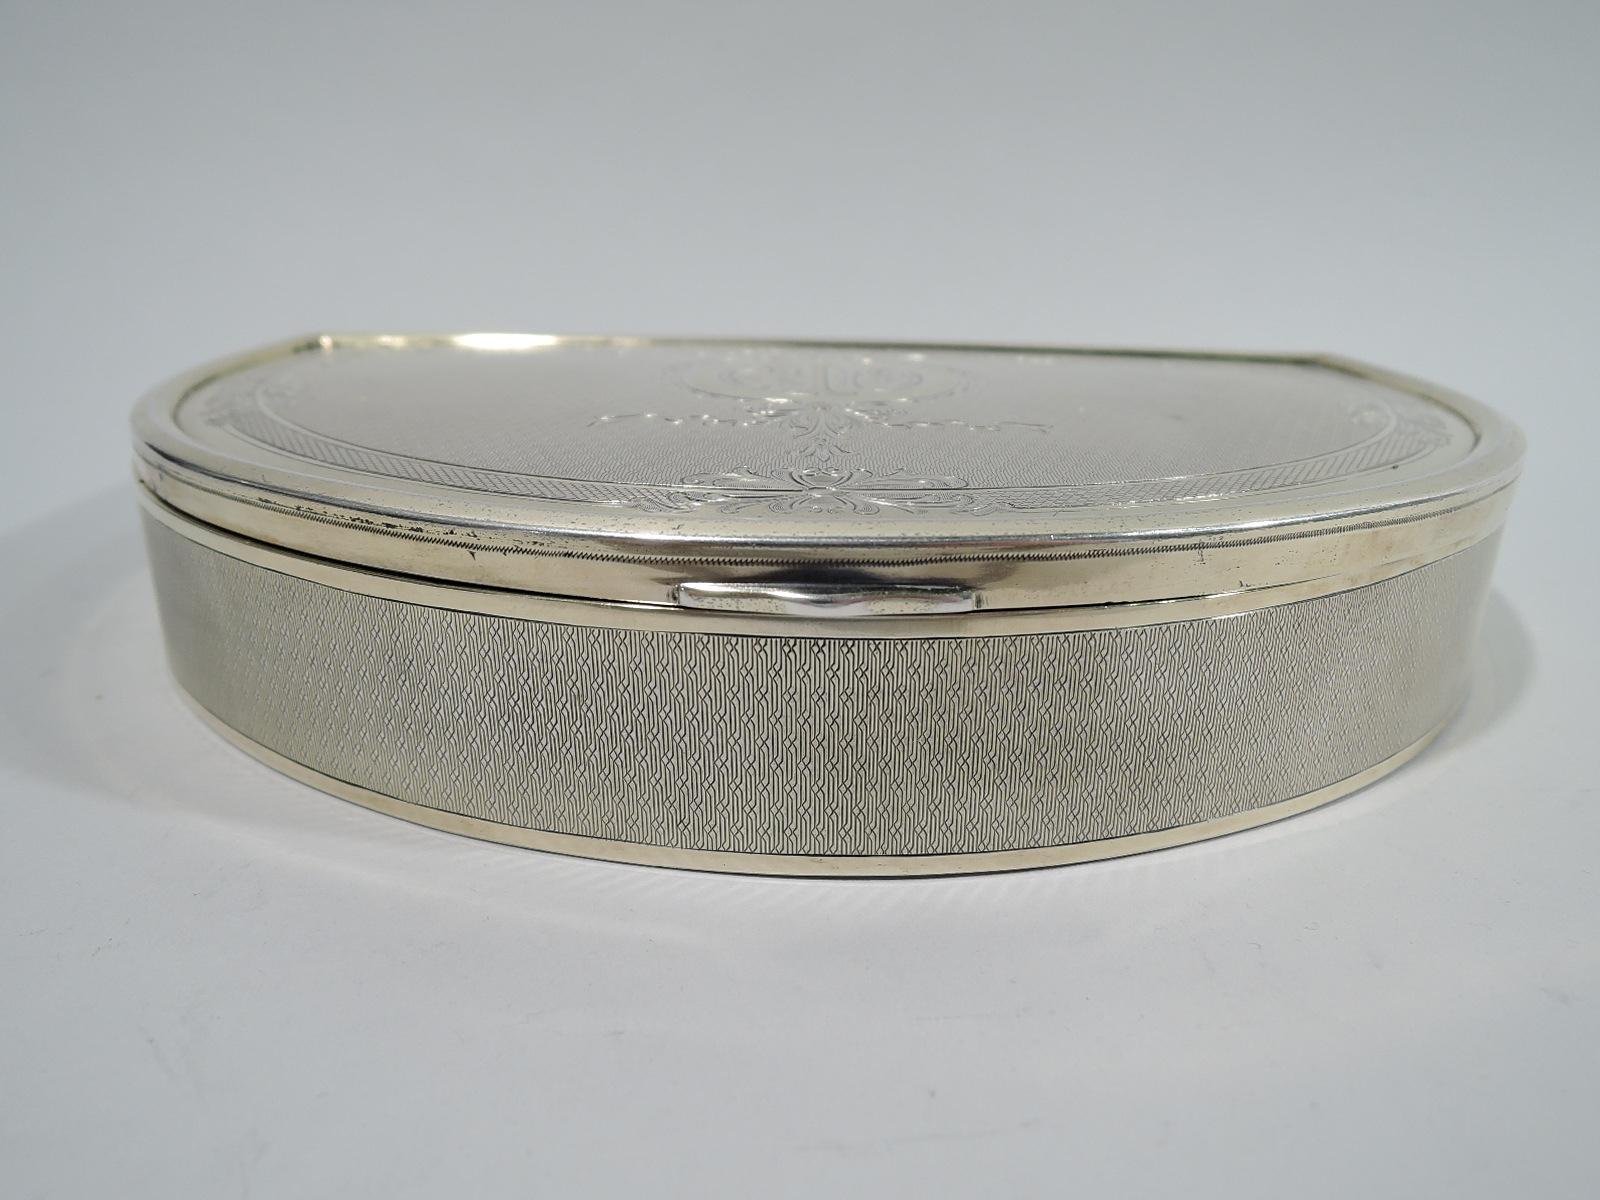 Edwardian Regency gilt sterling silver box. Made by Gorham in Providence in 1917. Lunette-form with flat and hinged cover. Engine-turned wave ornament. Cover ornament includes garland and leaf and ribbon wreath engraved with monogram. Interior has